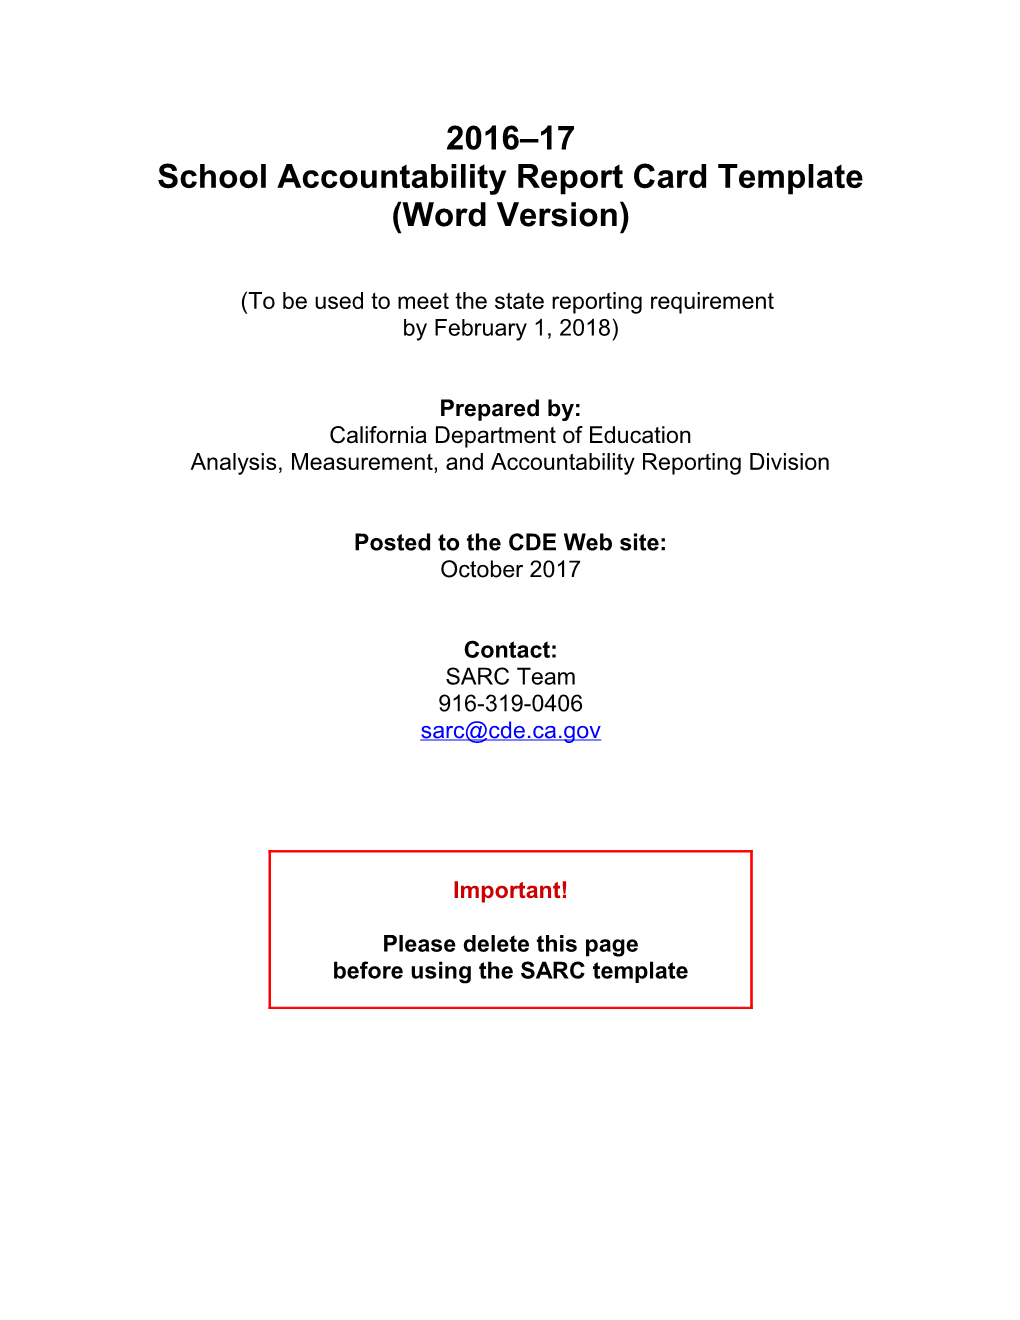 2016-17 SARC Template in Word - School Accountability Report Card (CA Dept of Education)